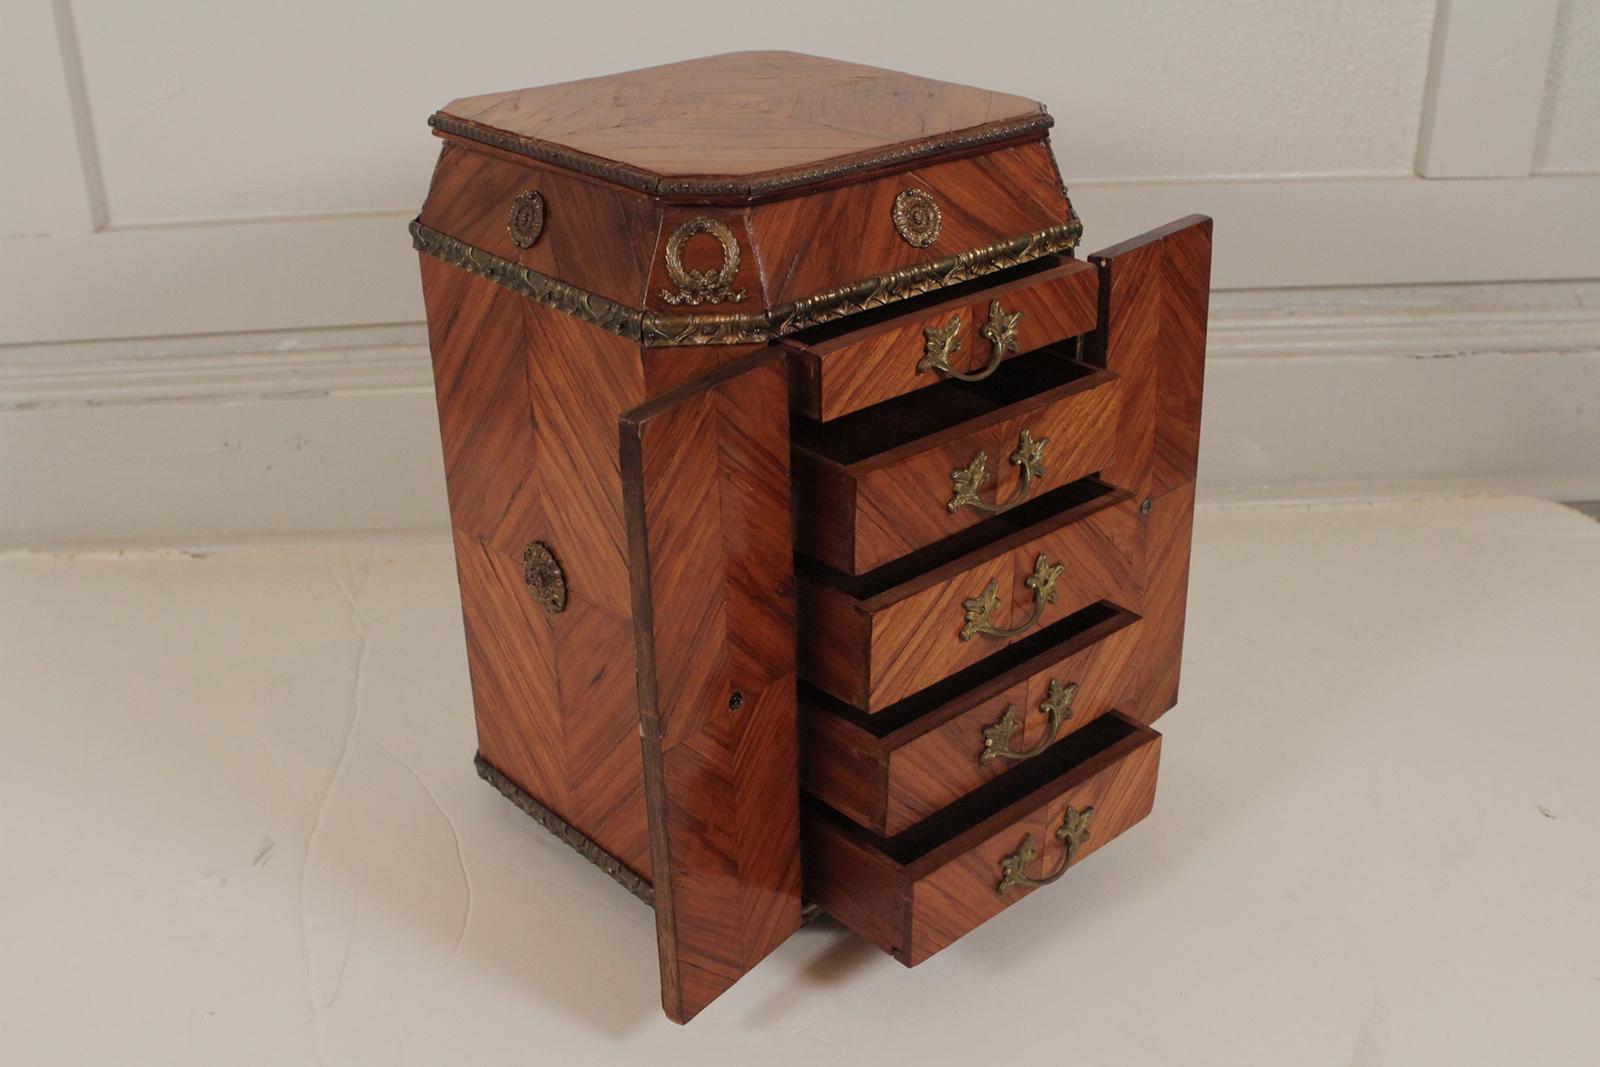 Early 20th Century Diminutive French Jewelry Chest with Drawers